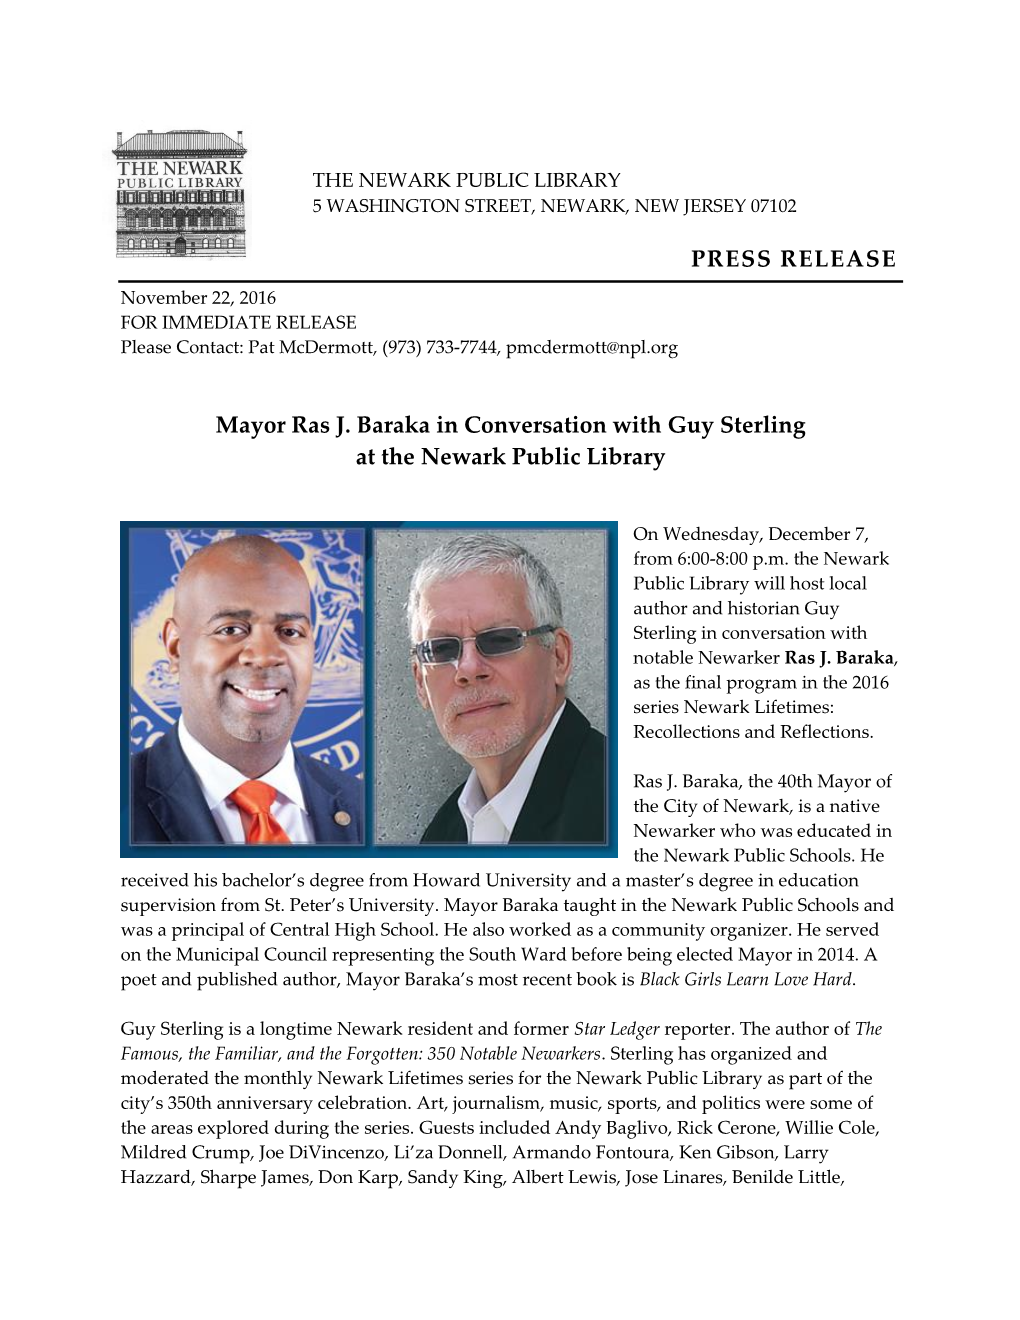 Mayor Ras J. Baraka in Conversation with Guy Sterling at the Newark Public Library